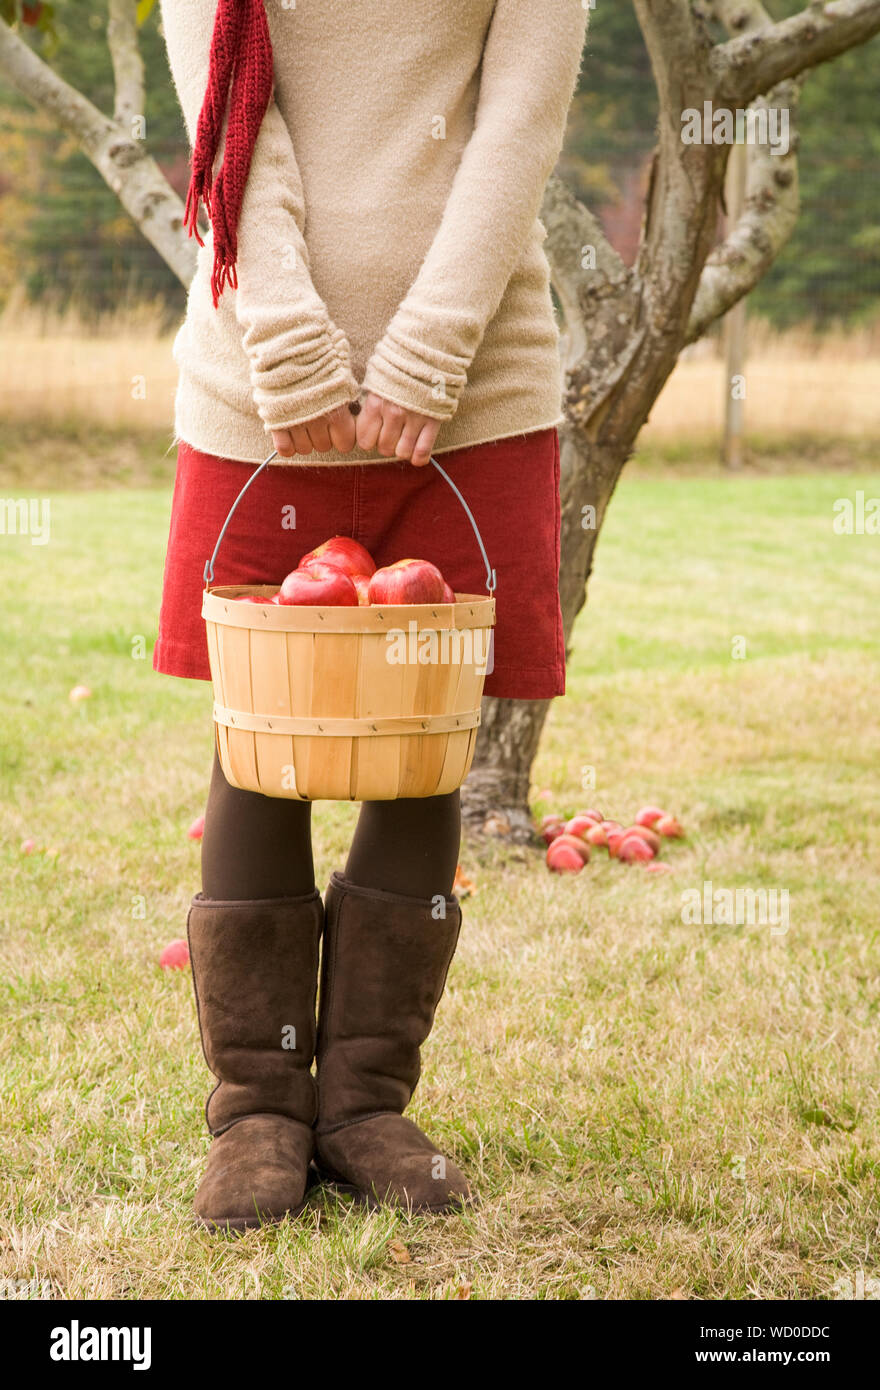 Young woman holding bushel basket of apples in orchard. People outdoors in fall season enjoying nature in the country. Stock Photo